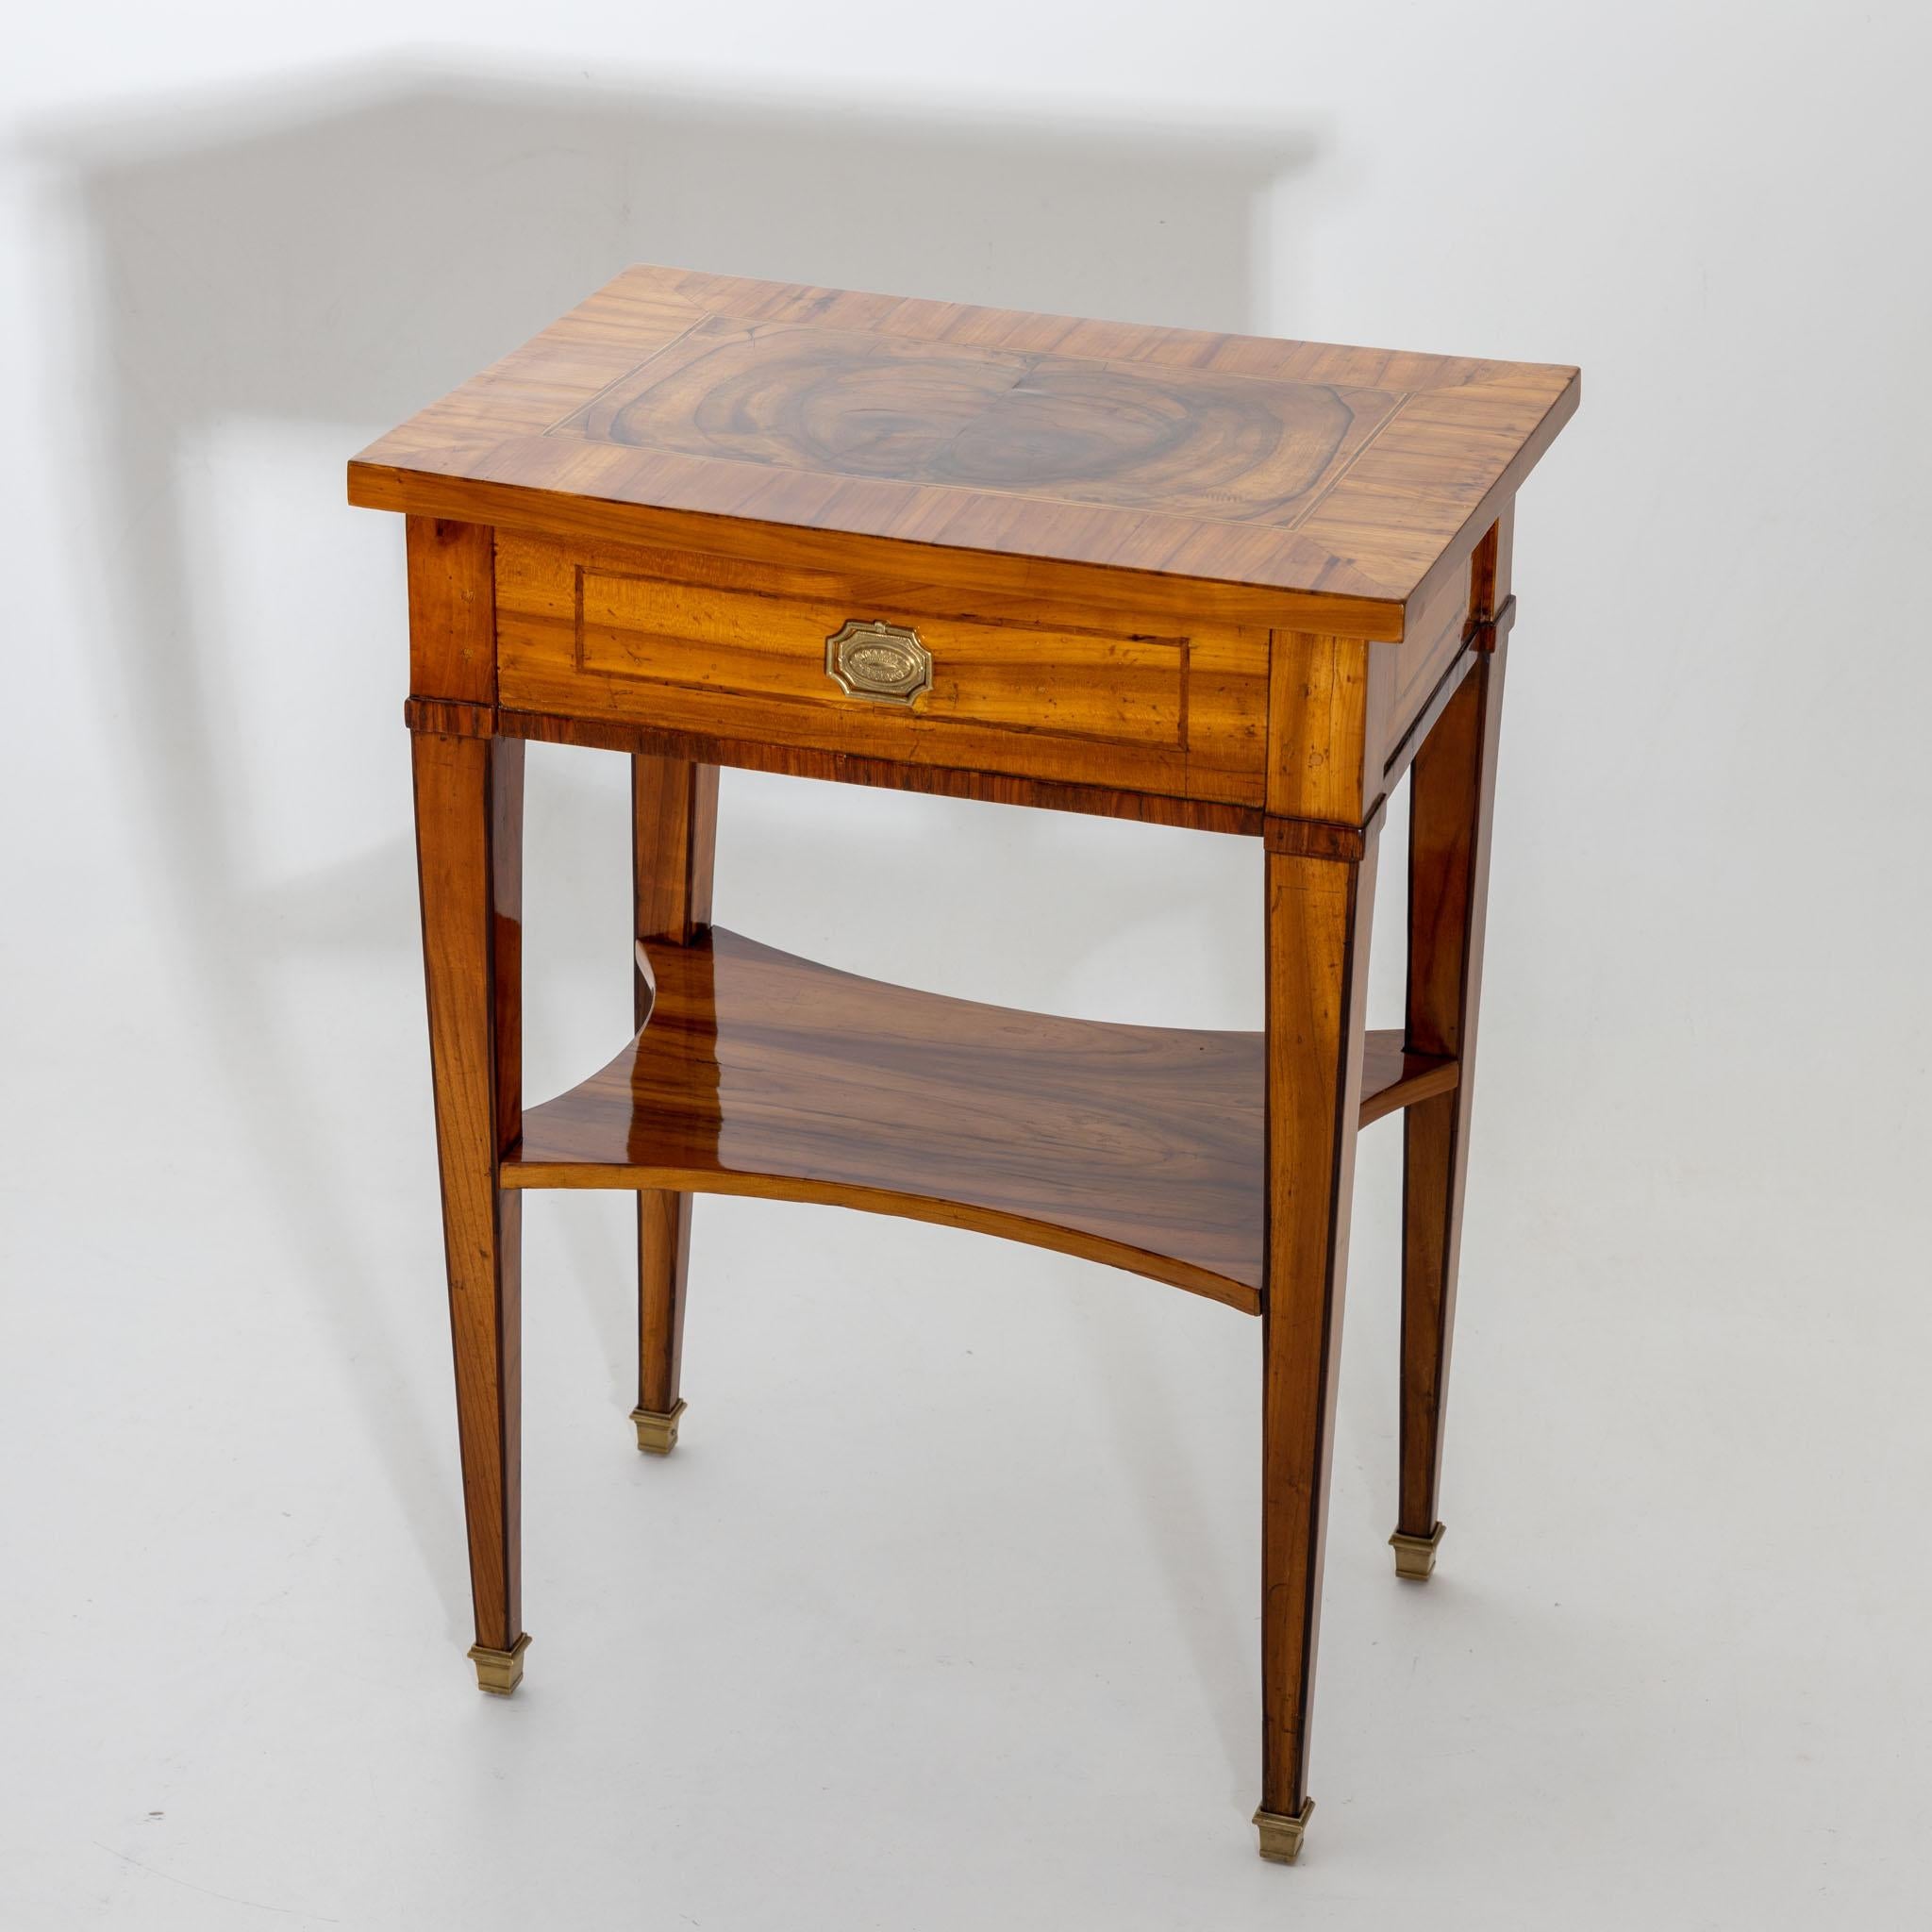 Neoclassical Side Table, Early 19th Century In Good Condition For Sale In Greding, DE